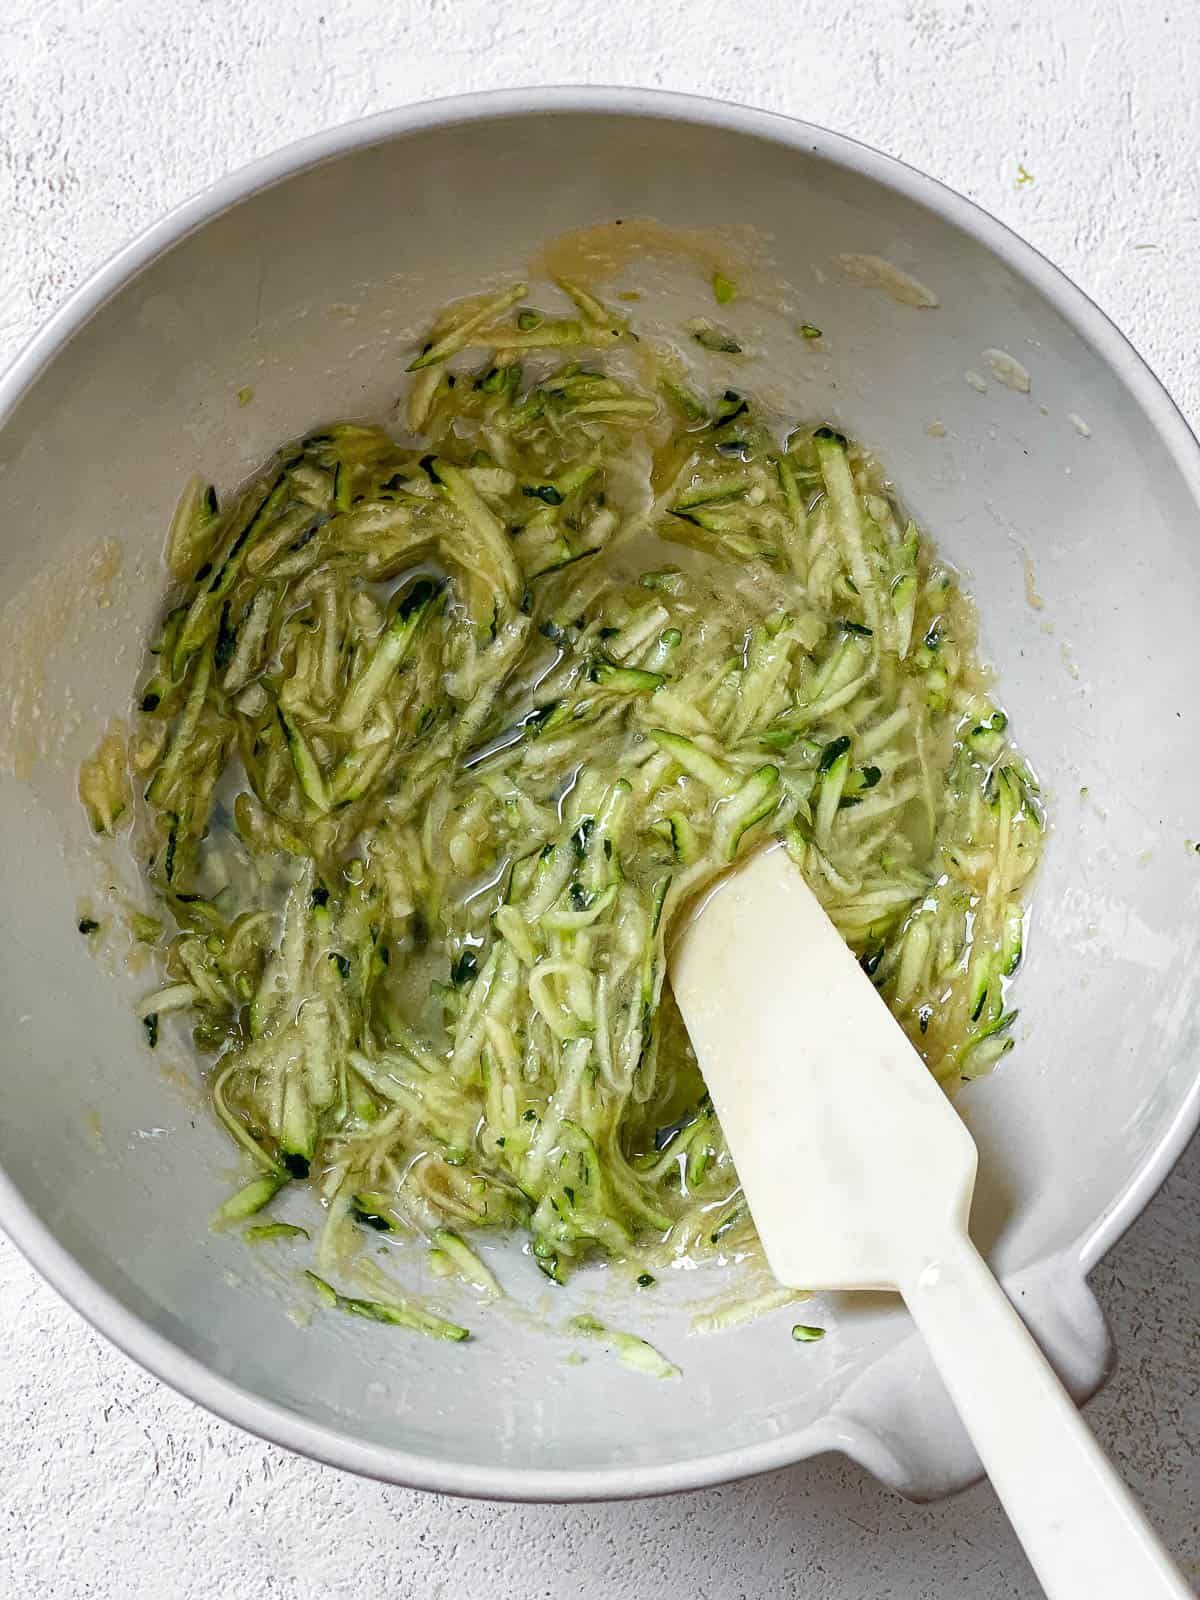 Grated zucchini and wet ingredients in a white bowl with white spatula on a white textured surface.